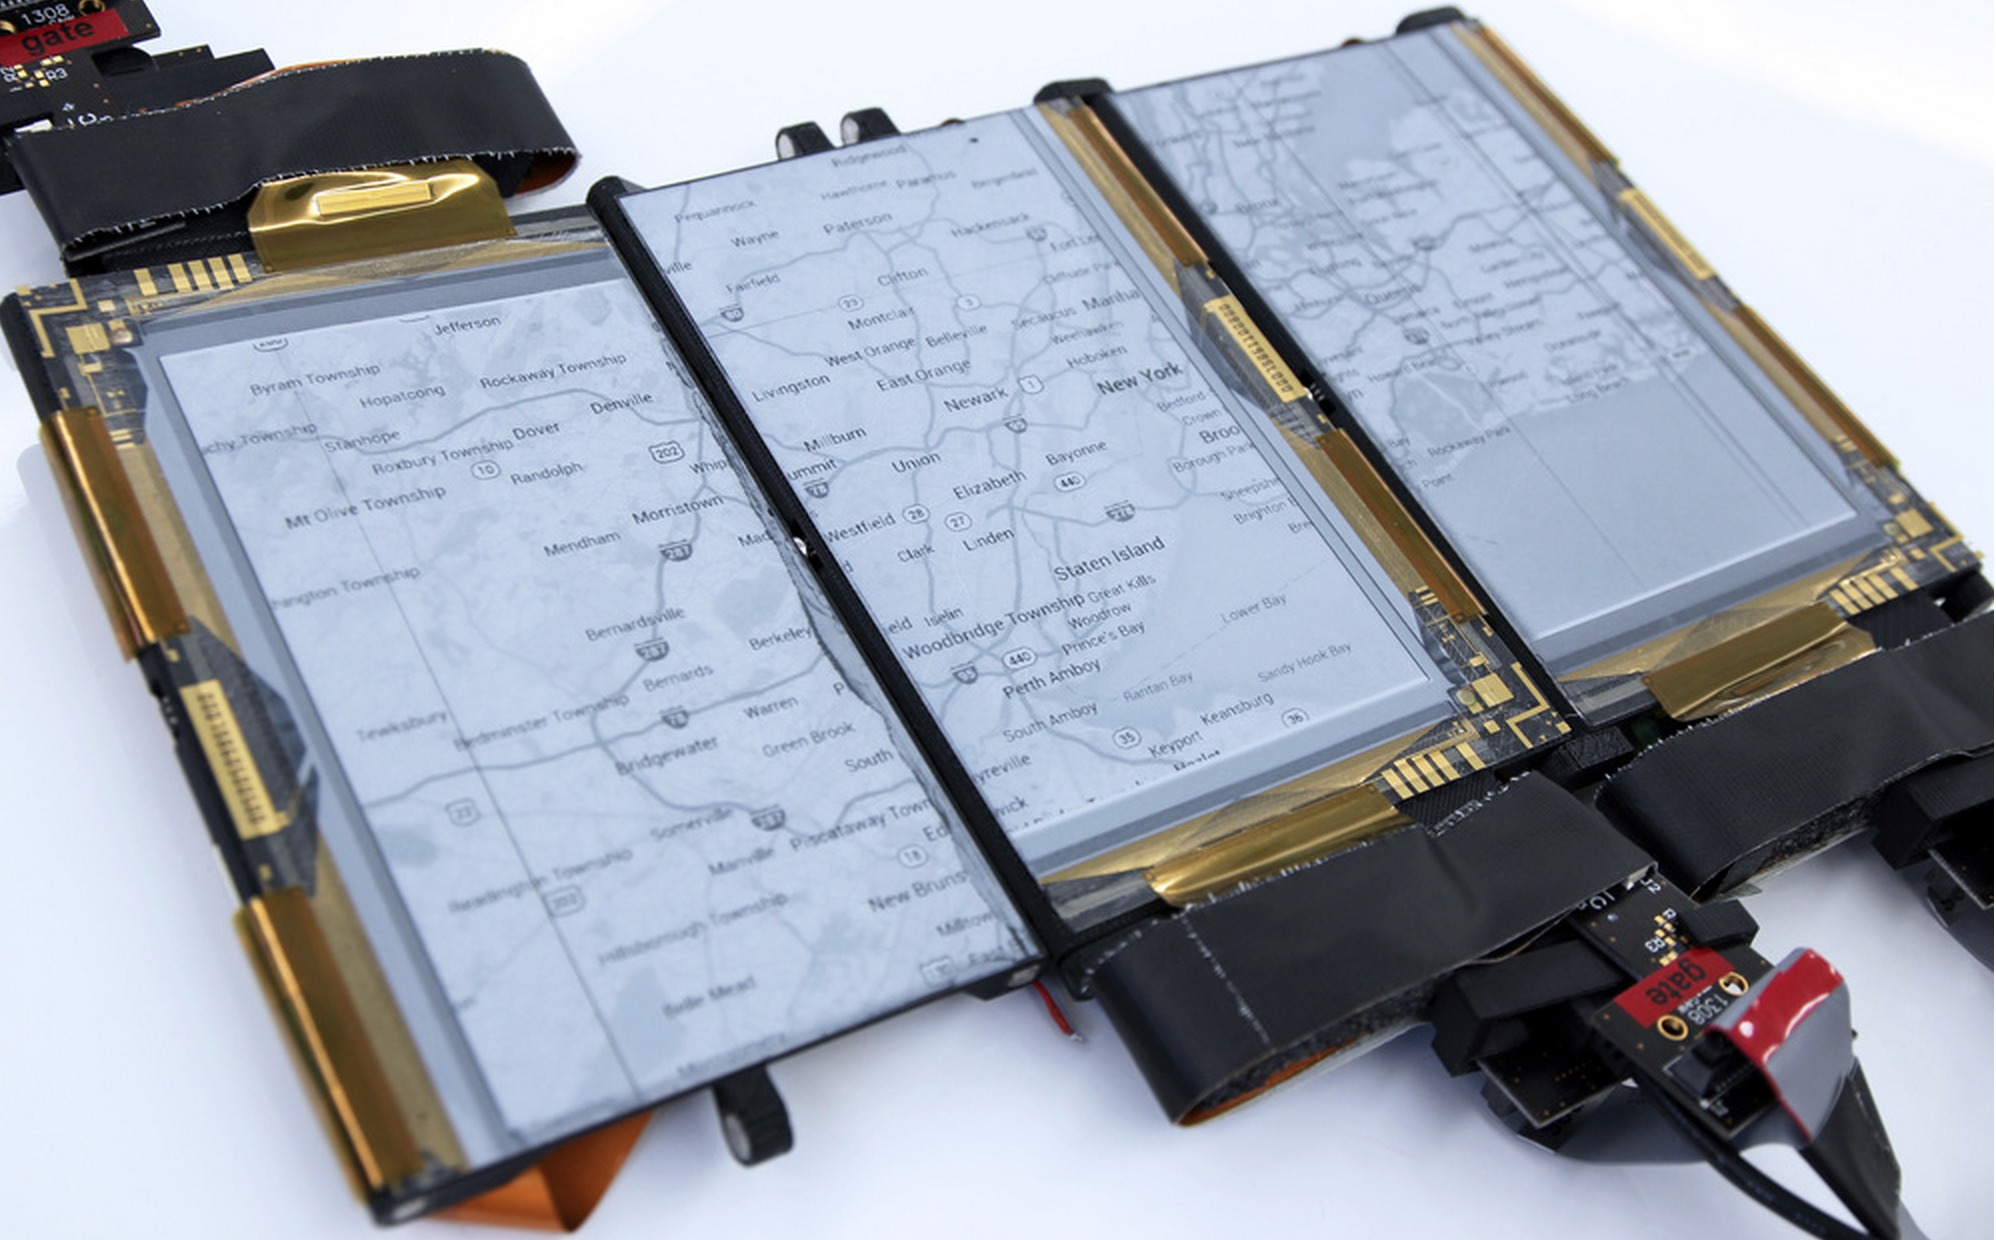 Geek insider, geekinsider, geekinsider. Com,, introducing paperfold: flip smart phones, android